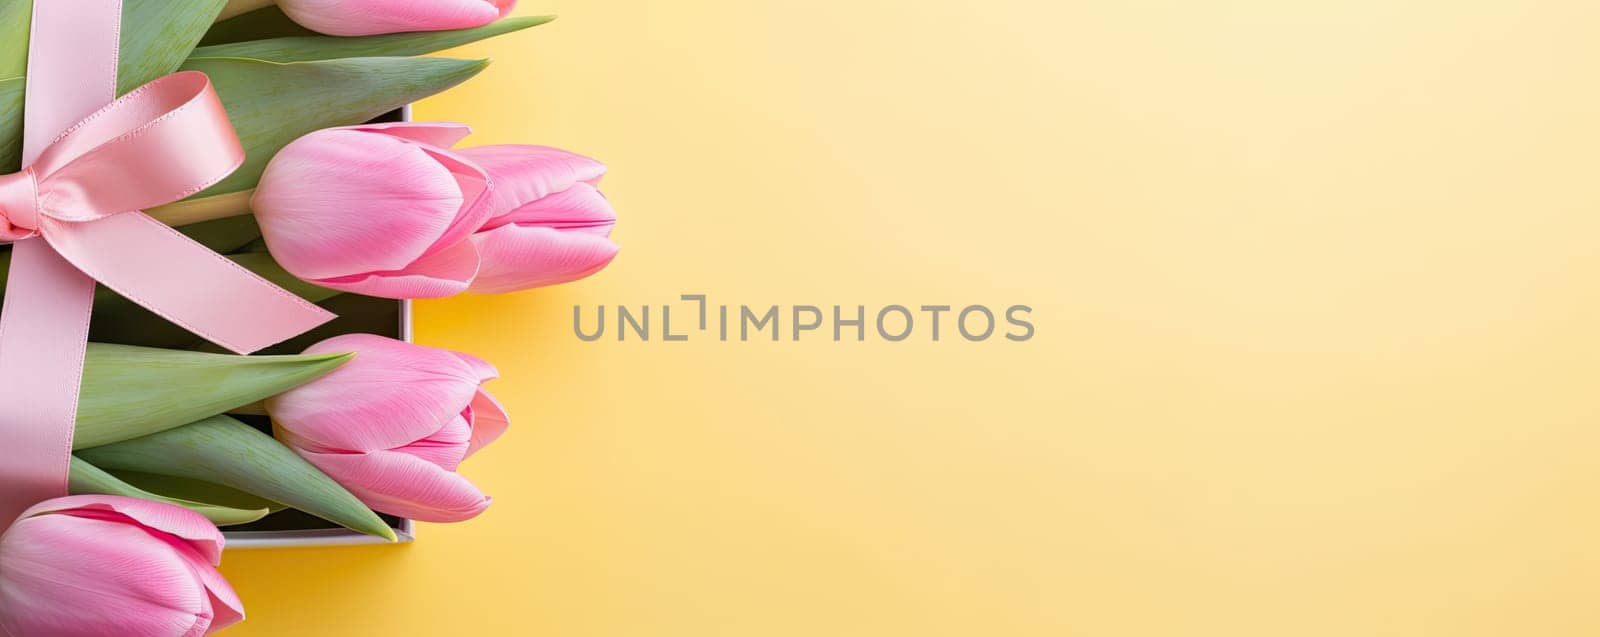 Bright and lively spring tulip banner with bright assortment of flowers on cheerful yellow background. Perfect for spring themes and celebrations